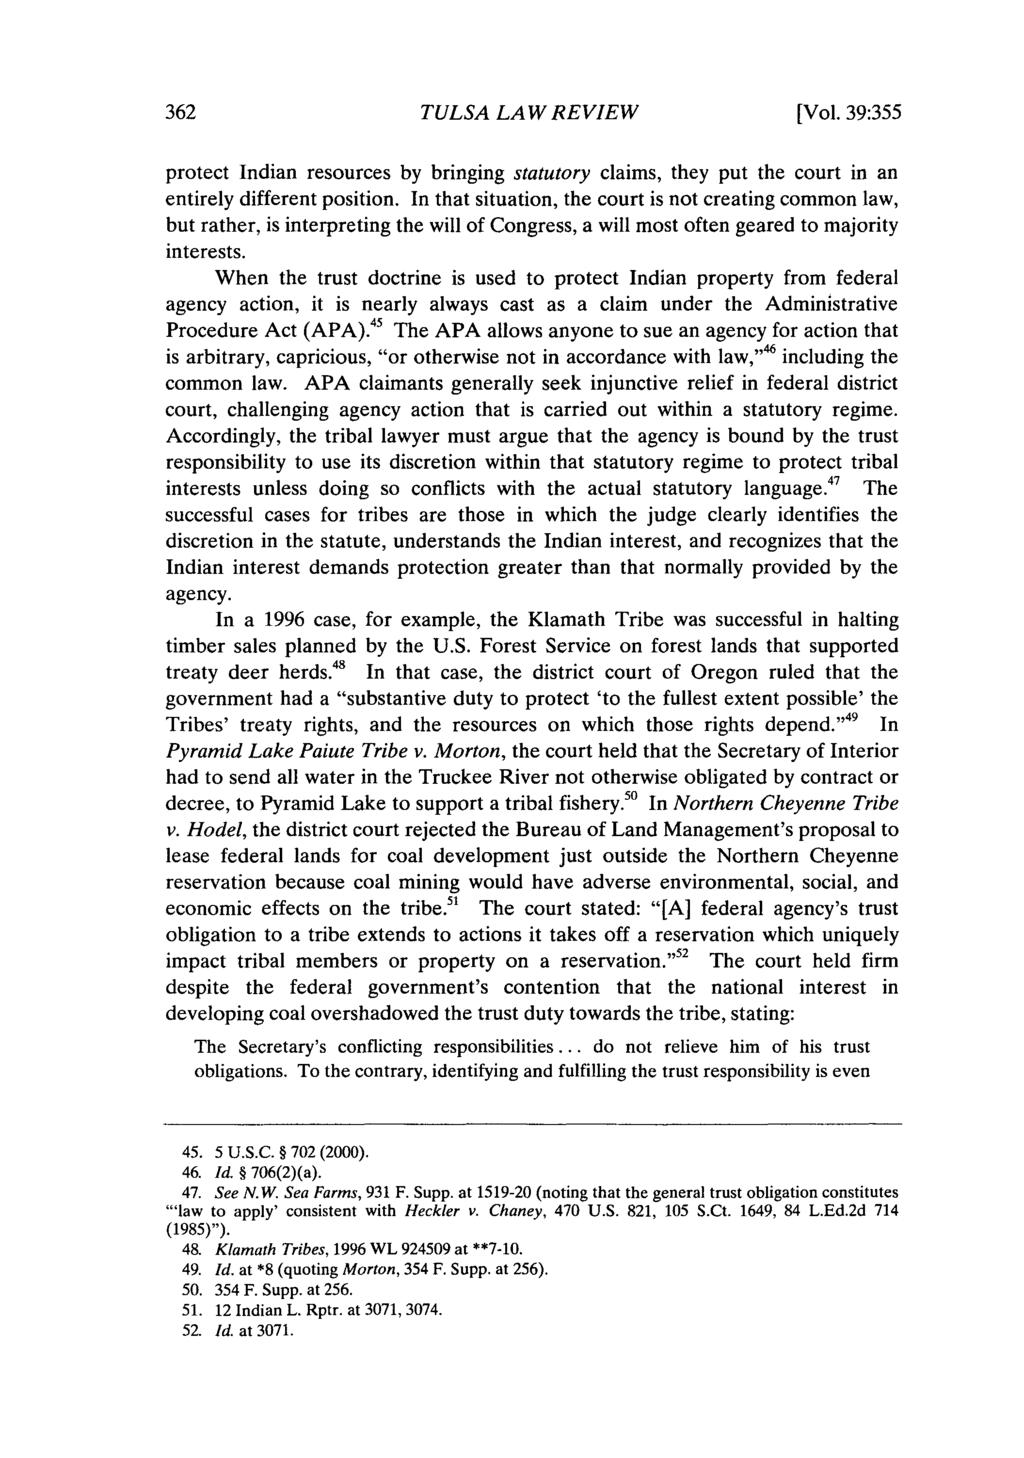 Tulsa Law Review, Vol. 39 [2003], Iss. 2, Art. 5 TULSA LAW REVIEW [Vol. 39:355 protect Indian resources by bringing statutory claims, they put the court in an entirely different position.